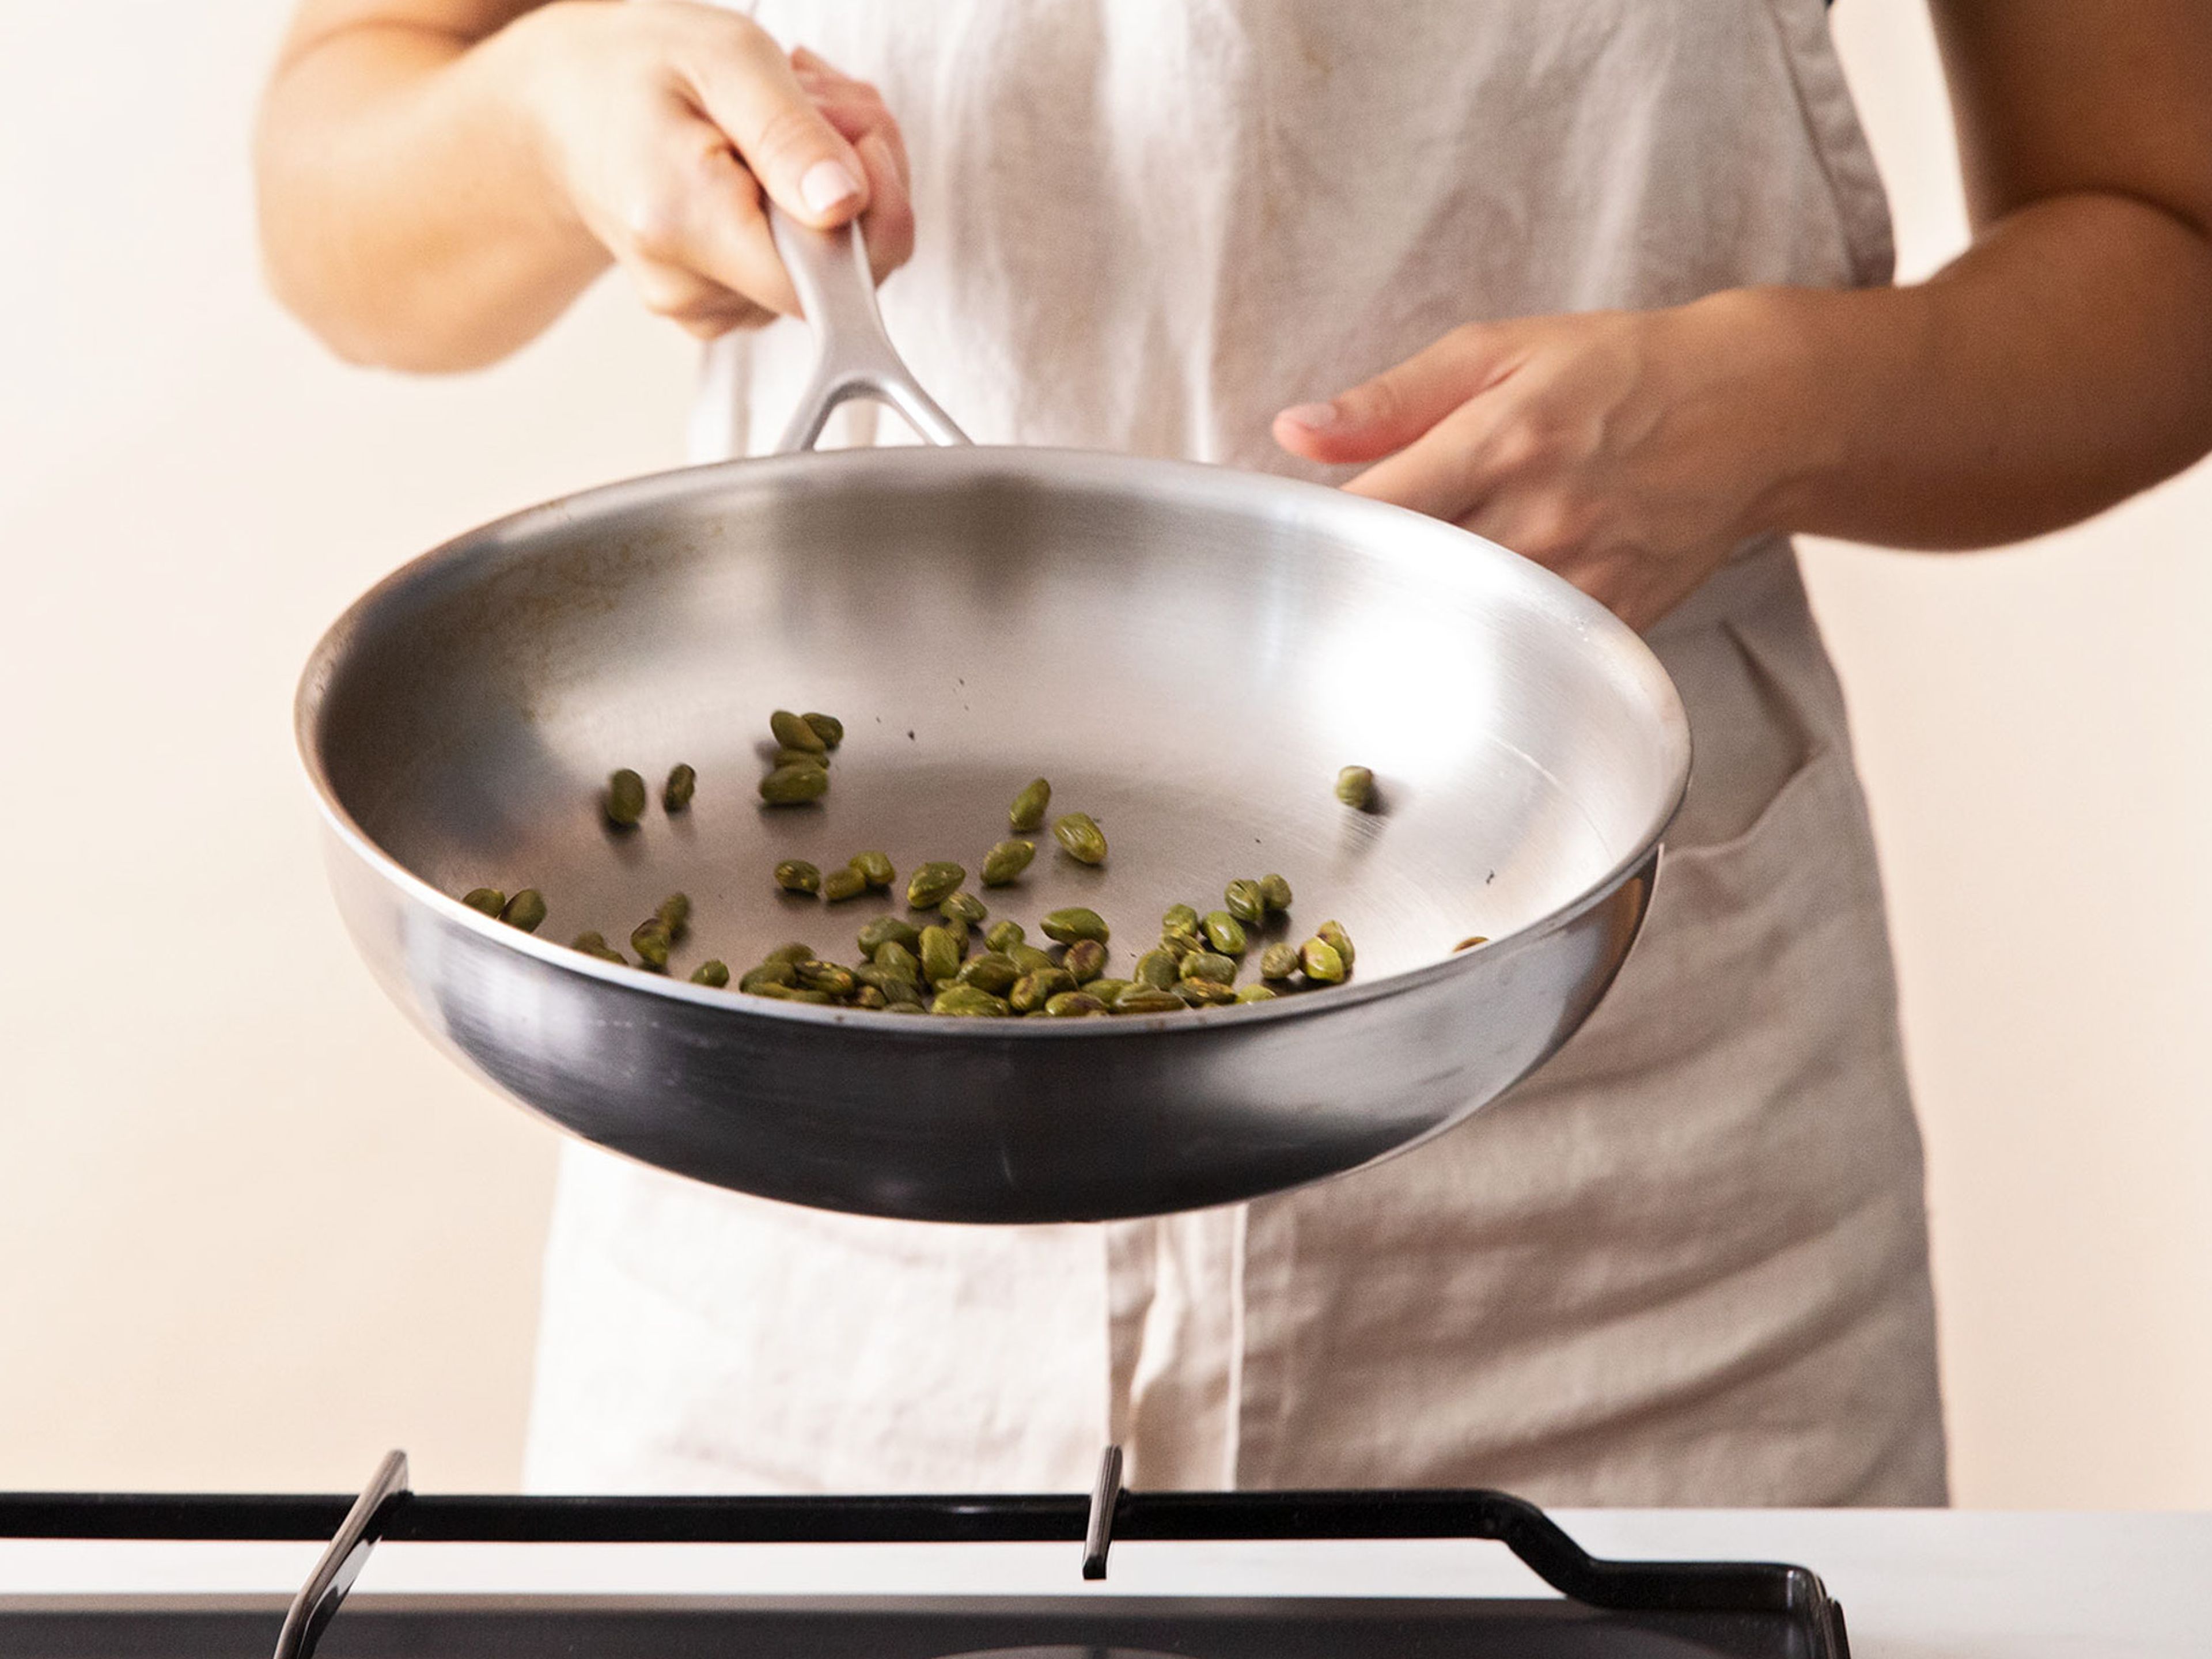 In a frying pan, toast pistachios until fragrant over medium heat. Set aside to cool. In the meantime, combine sugar and water in a saucepan over medium heat, stirring to dissolve the sugar. Allow to simmer until the mixture starts to bubble, approx. 7 min.